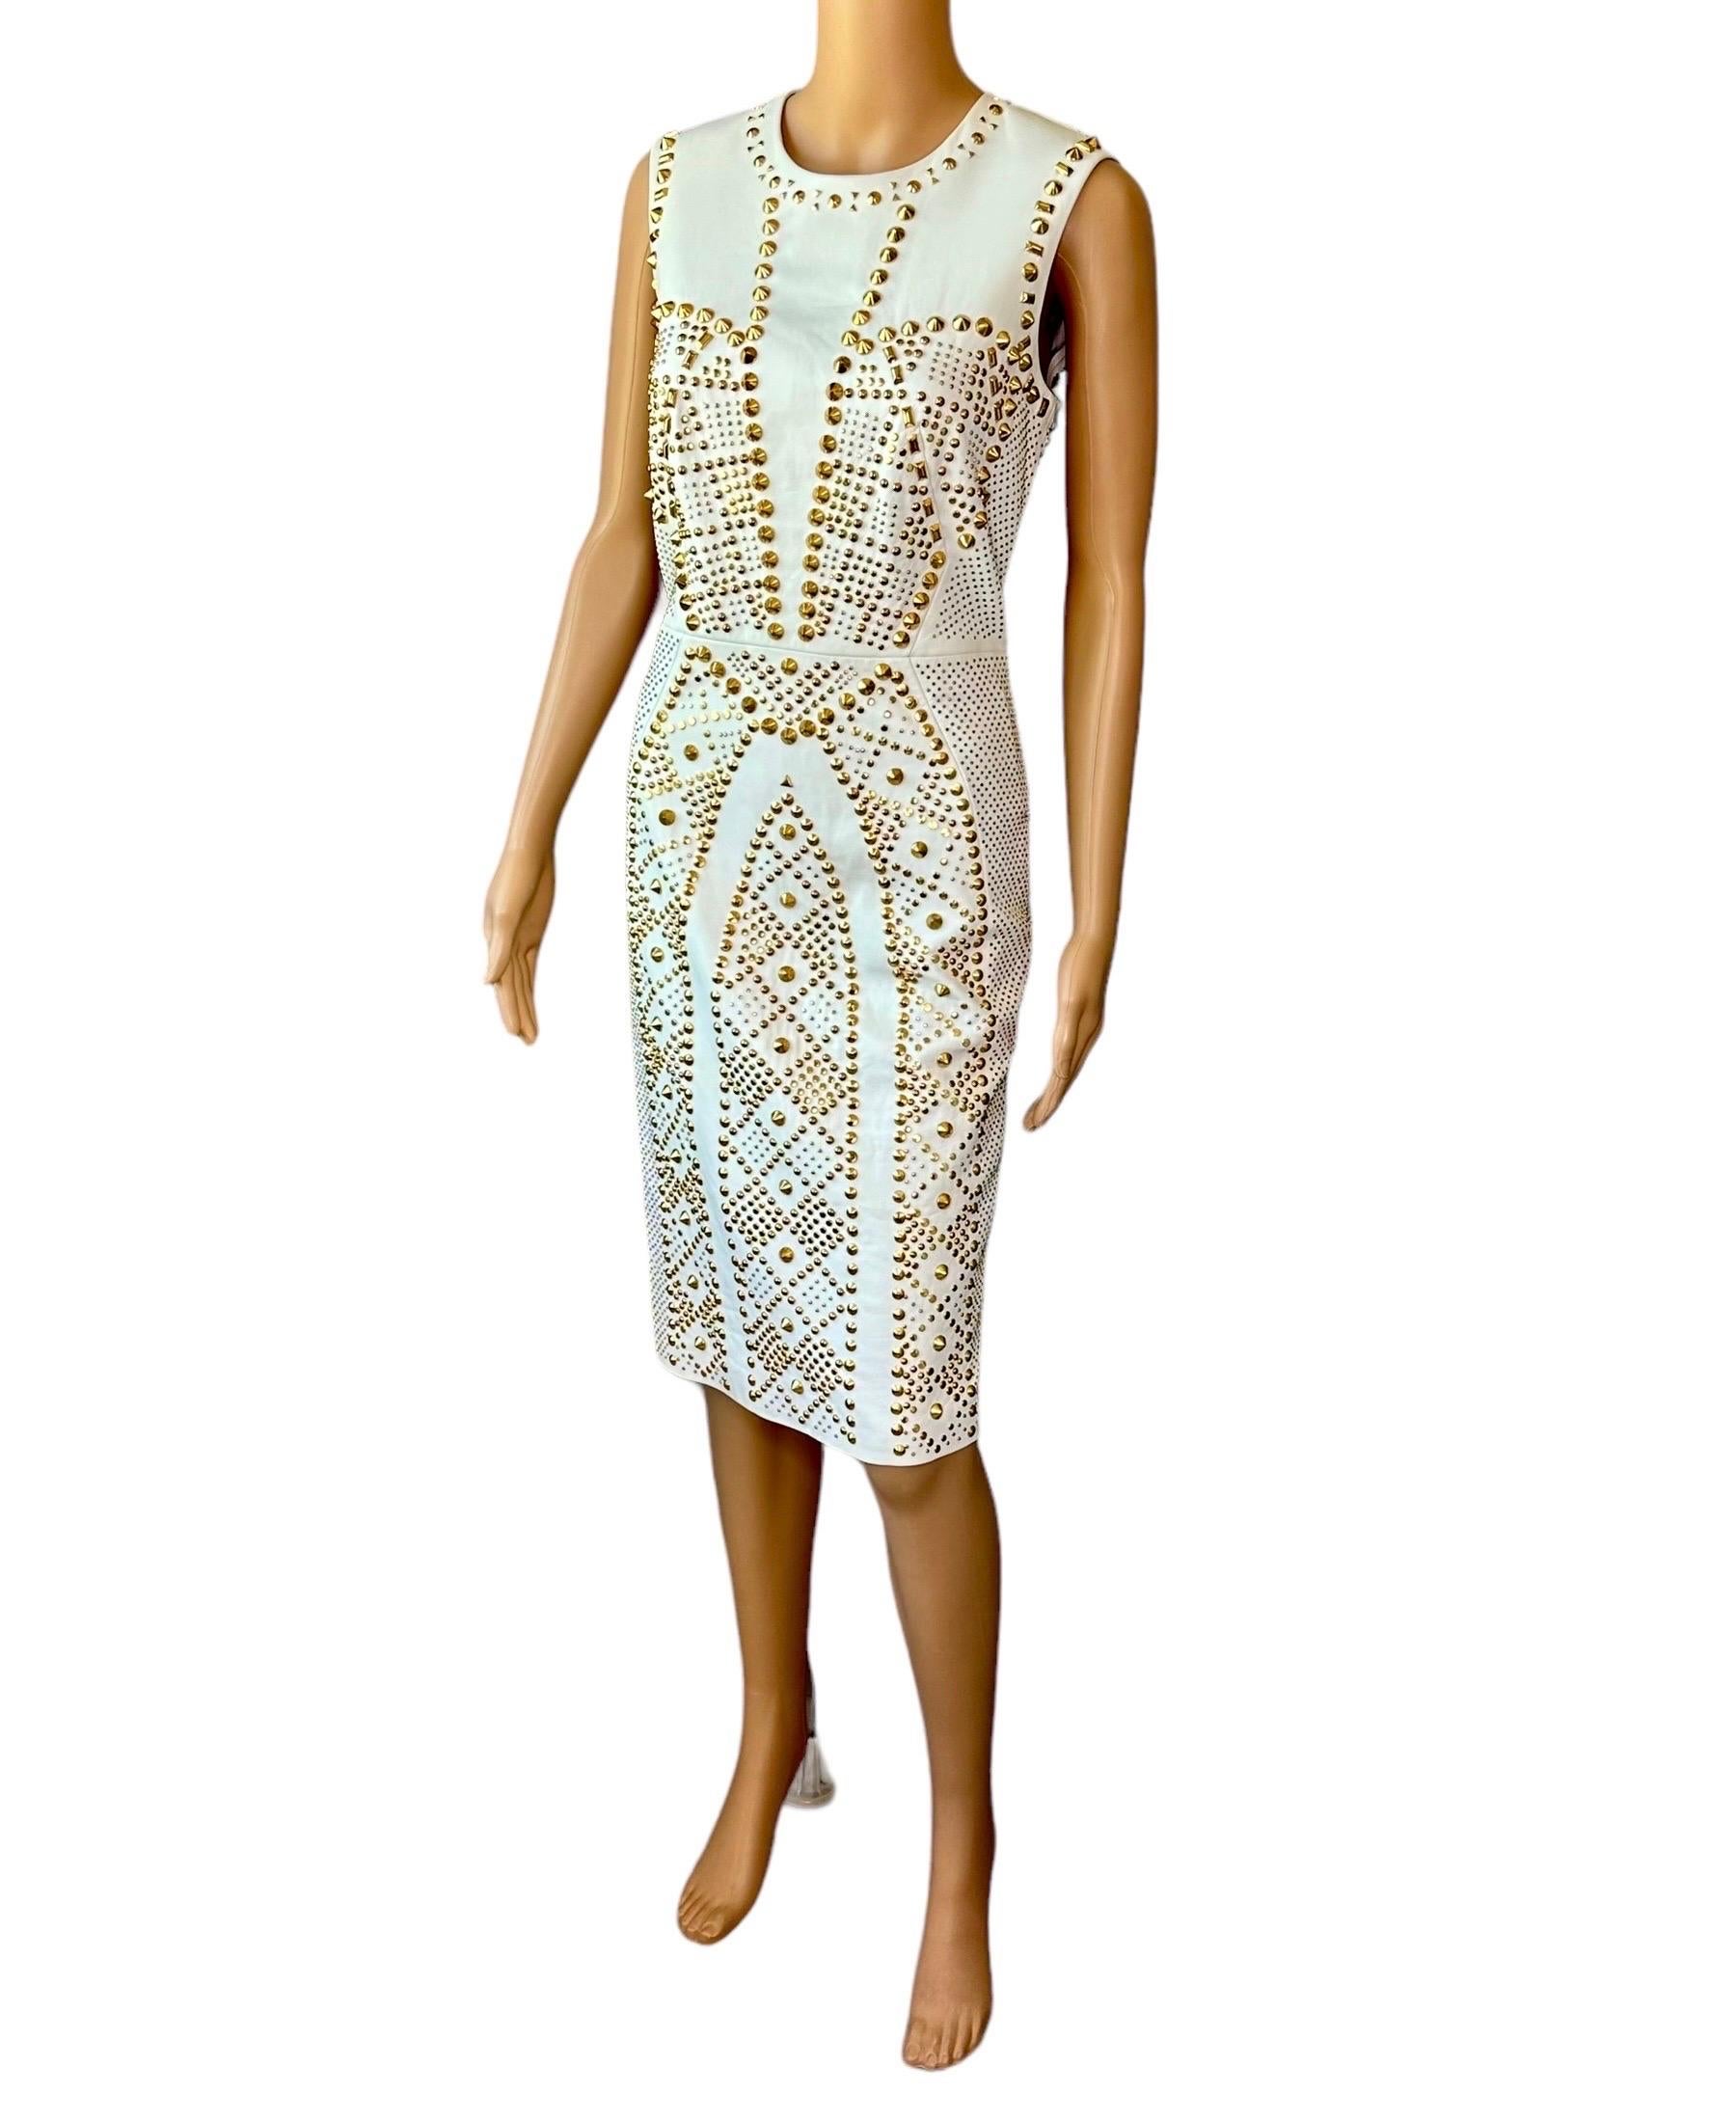 Versace S/S 2012 Runway Embellished Gold Studded Ivory Leather Dress  For Sale 7